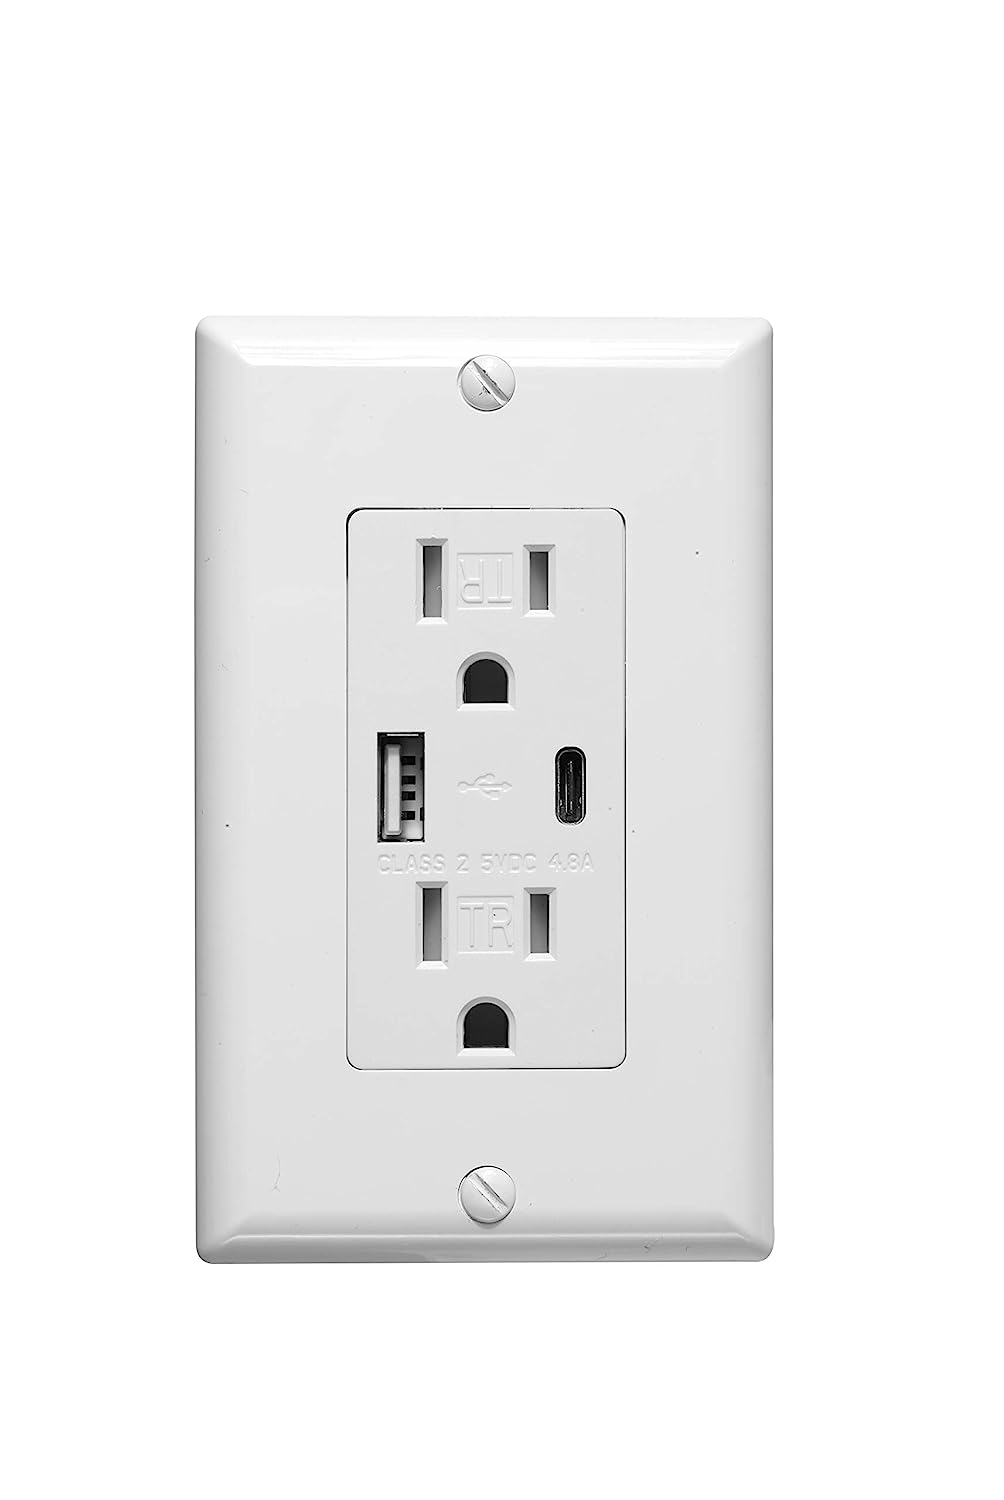 Sunlite 08154 USB Charger and Duplex Receptacle, USB-A/C Ports, DC 4.8A 5A, 15A-125VAC, Decorator Style, Tamper Resistant, White with Cover Plate, for Fast Charging for Mobile Devices, UL Listed